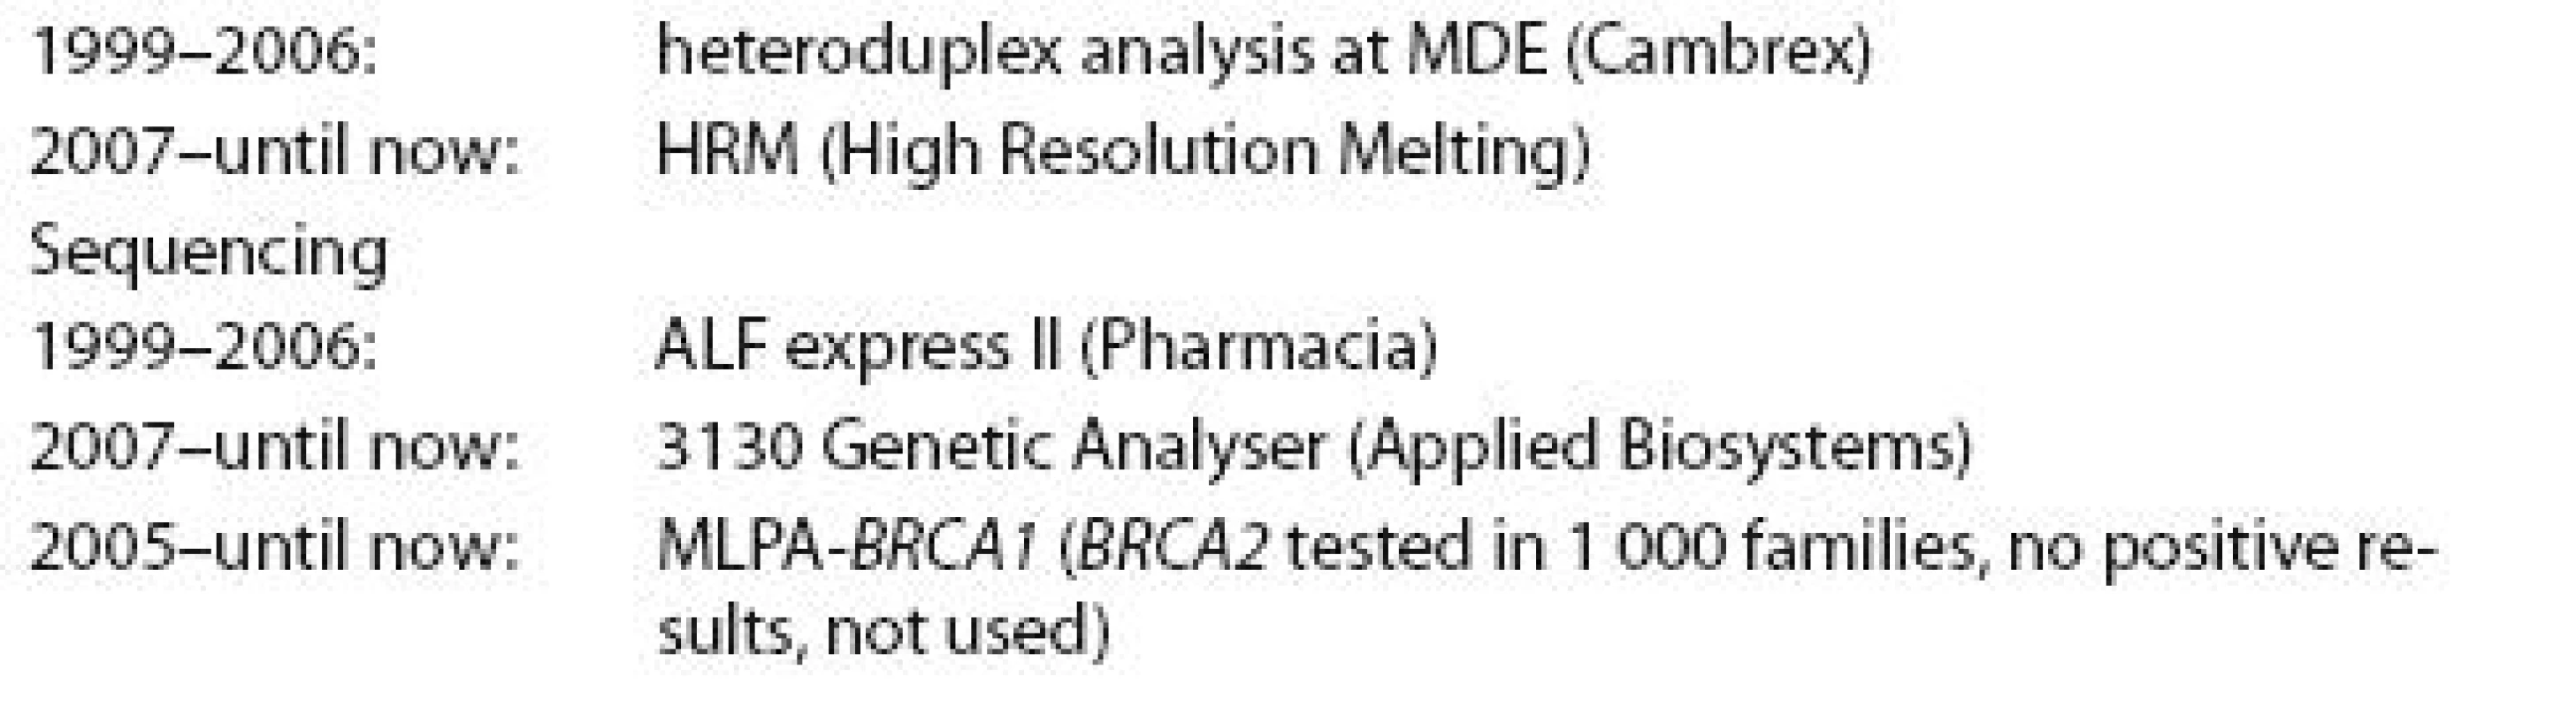 Laboratory methods used for BRCA1 and BRCA2 analysis at MMCI.